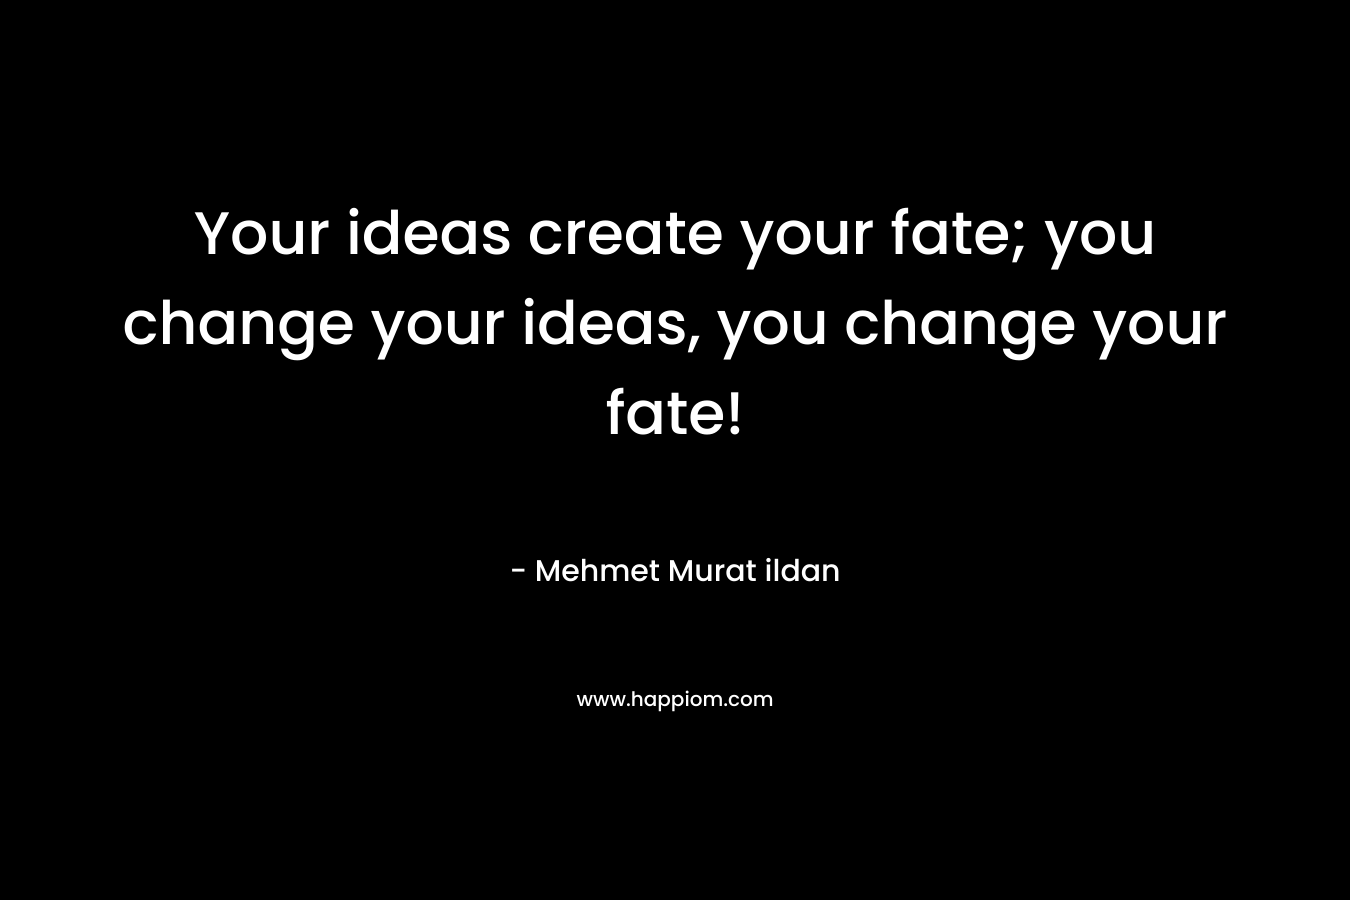 Your ideas create your fate; you change your ideas, you change your fate!